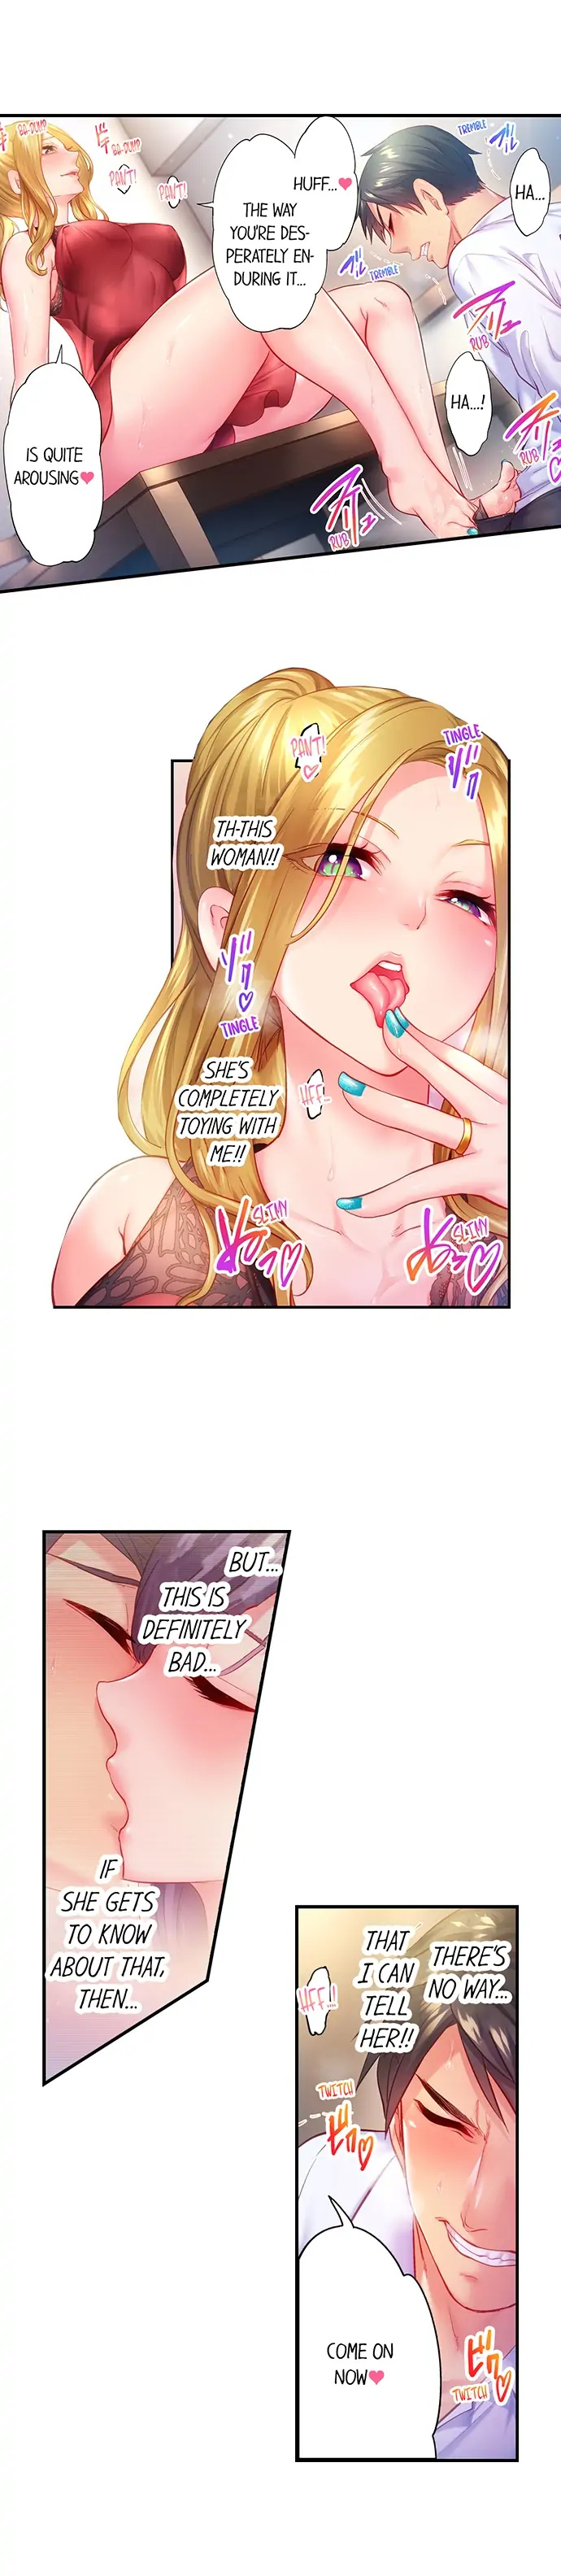 First Time With My Wife (Again) - Chapter 7 Page 6